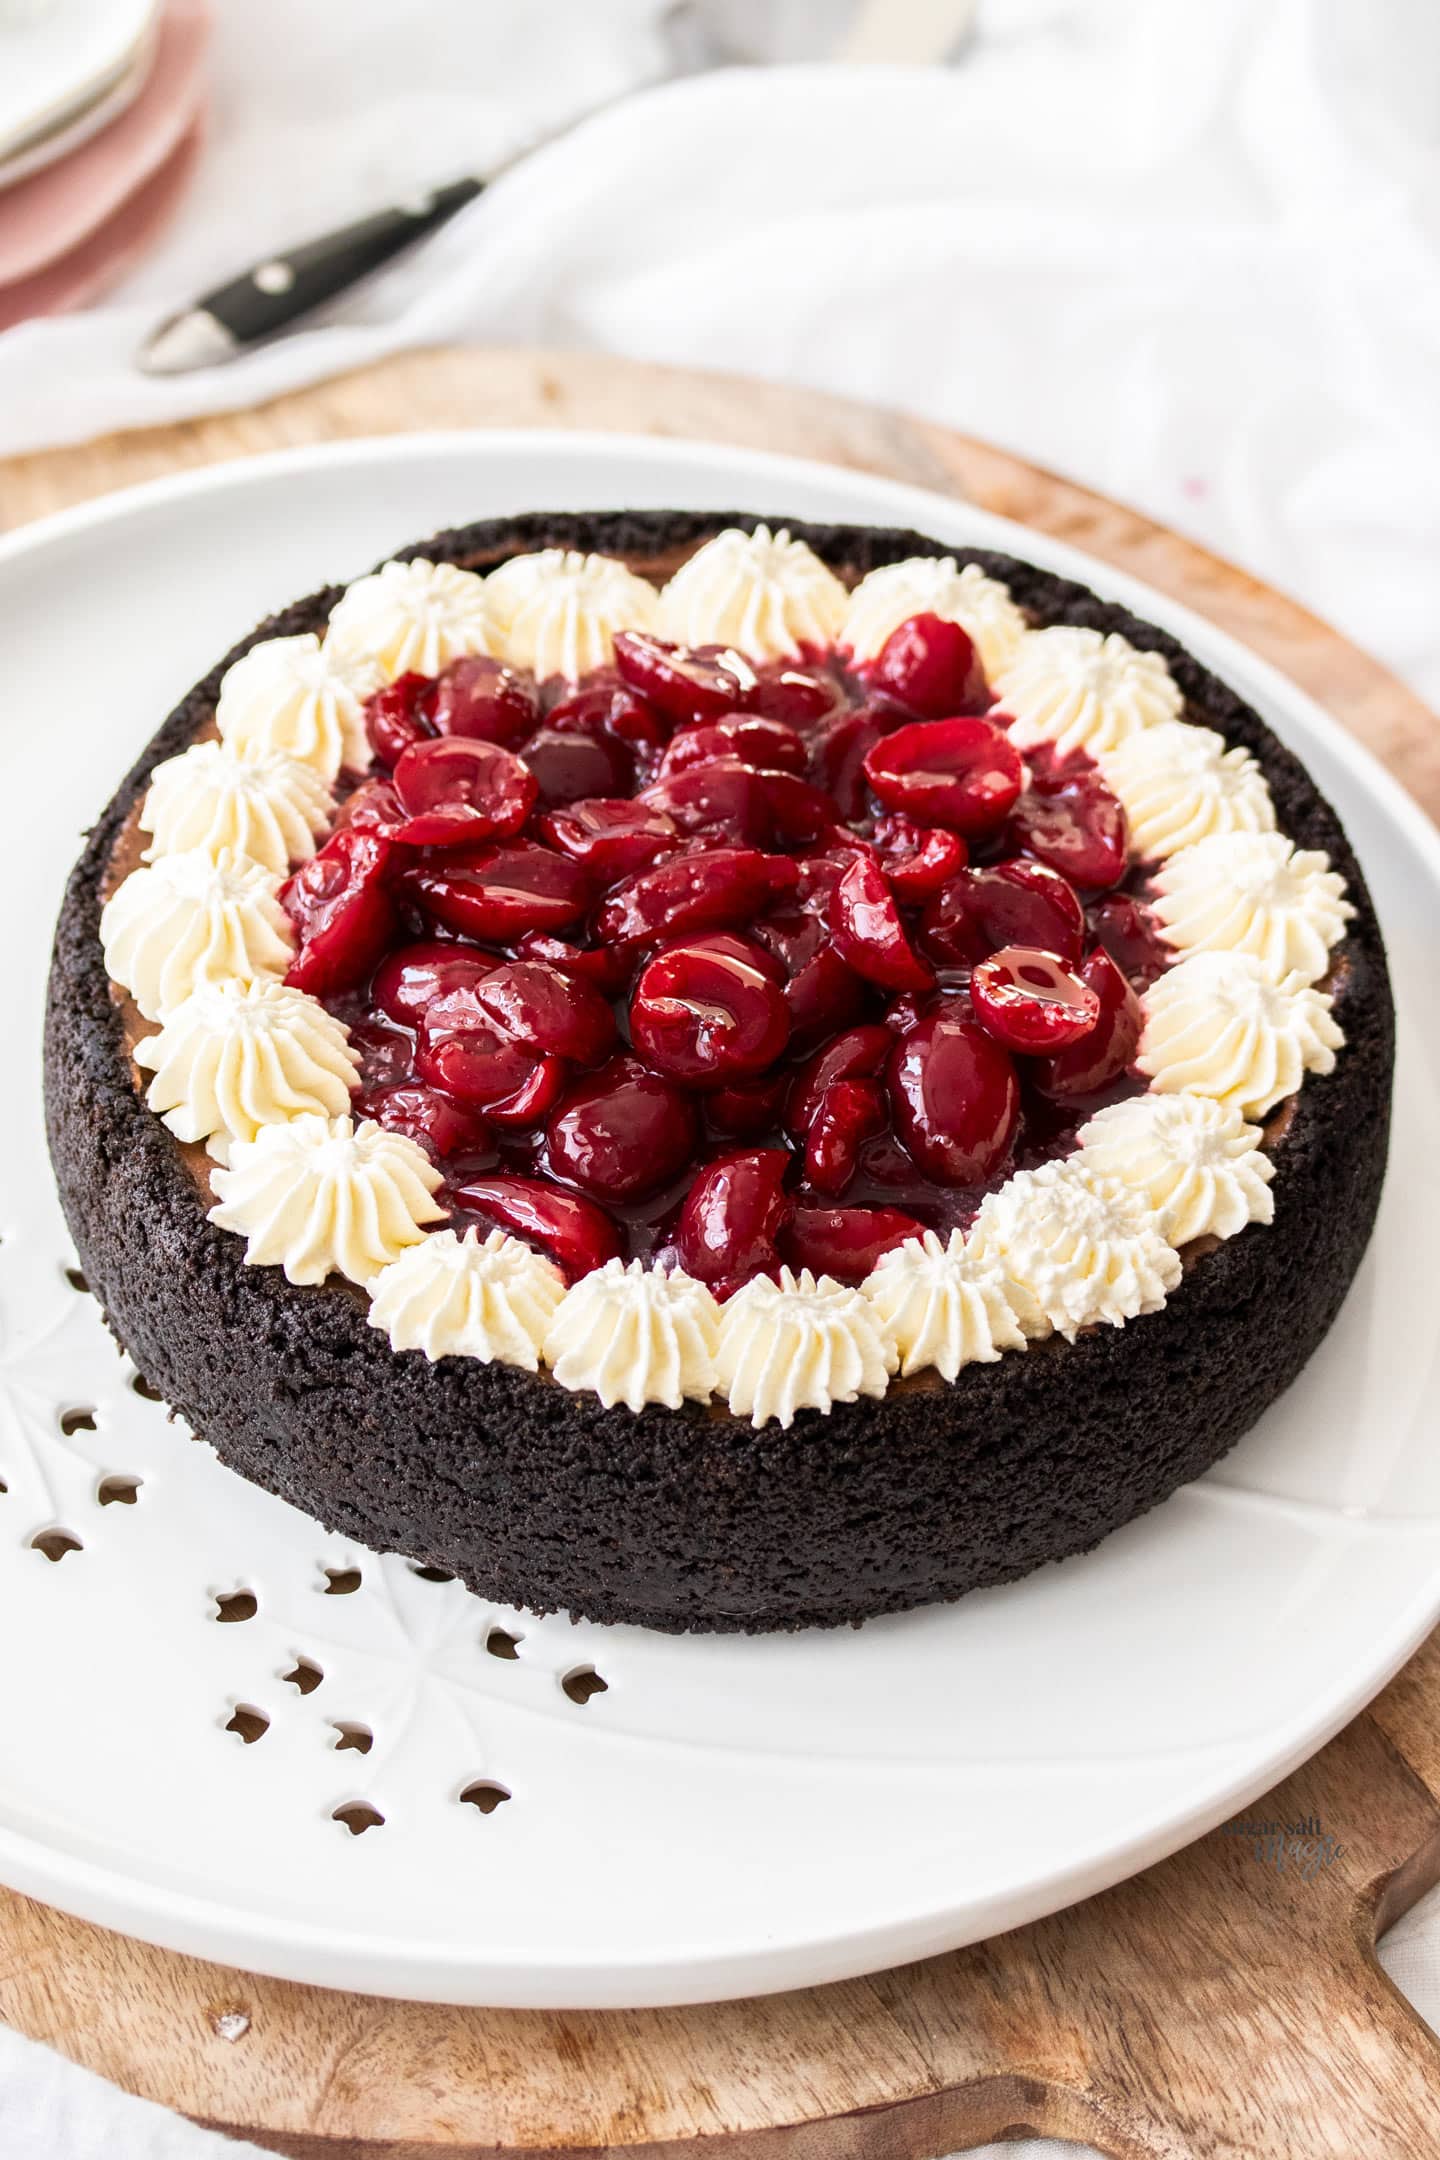 A whole black forest cheesecake on a platter.